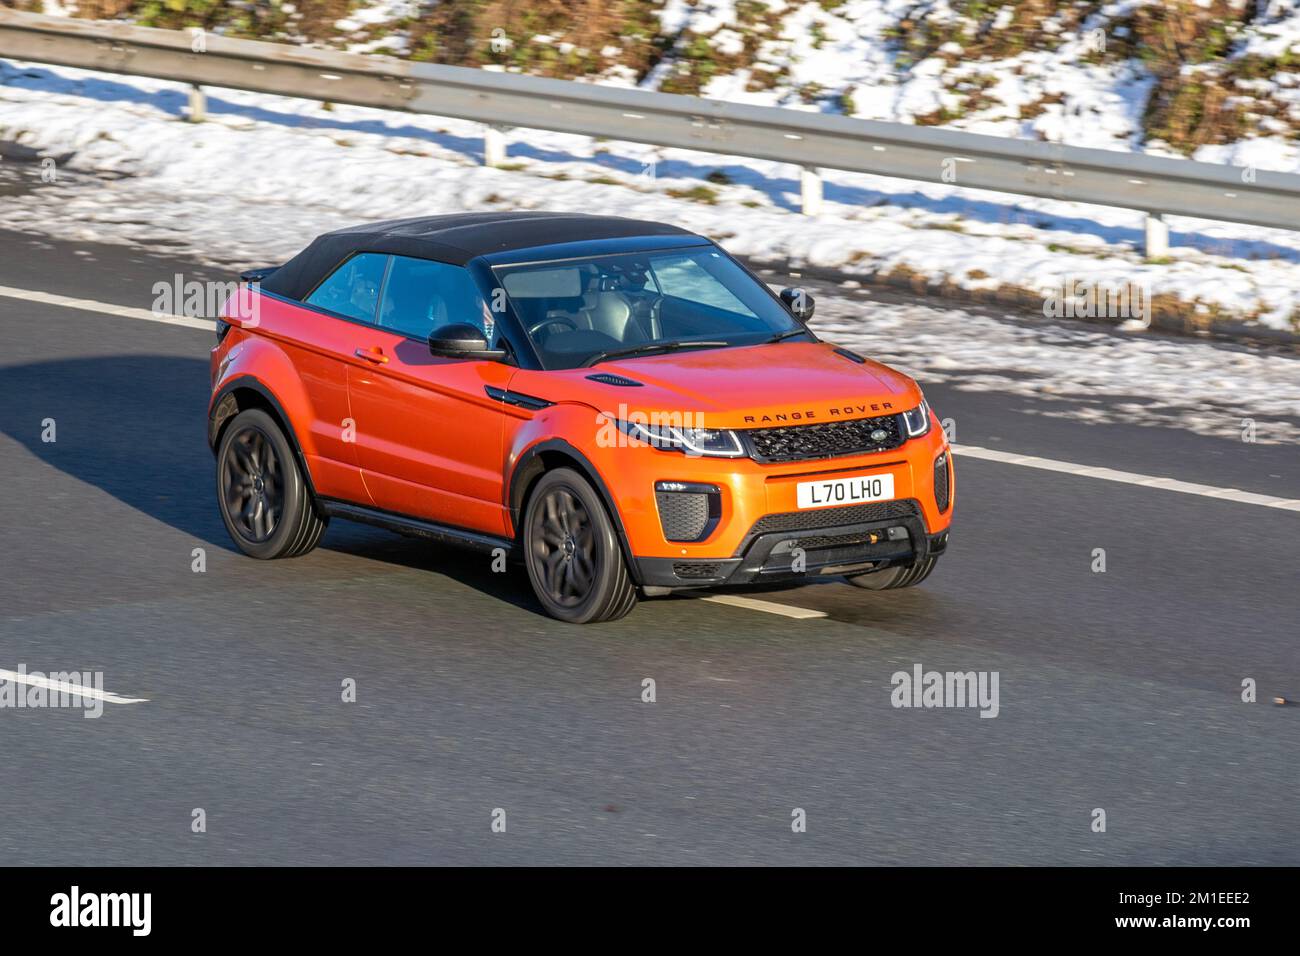 2016 Orange LAND ROVER, RANGE ROVER EVOQUE TD4 HSE DYNAMIC 1999cc Diesel Cabrio; Cars travelling on a cold winter morning. Wintertime low temperatures with December frost and cold driving conditions on the M61 motorway, UK Stock Photo